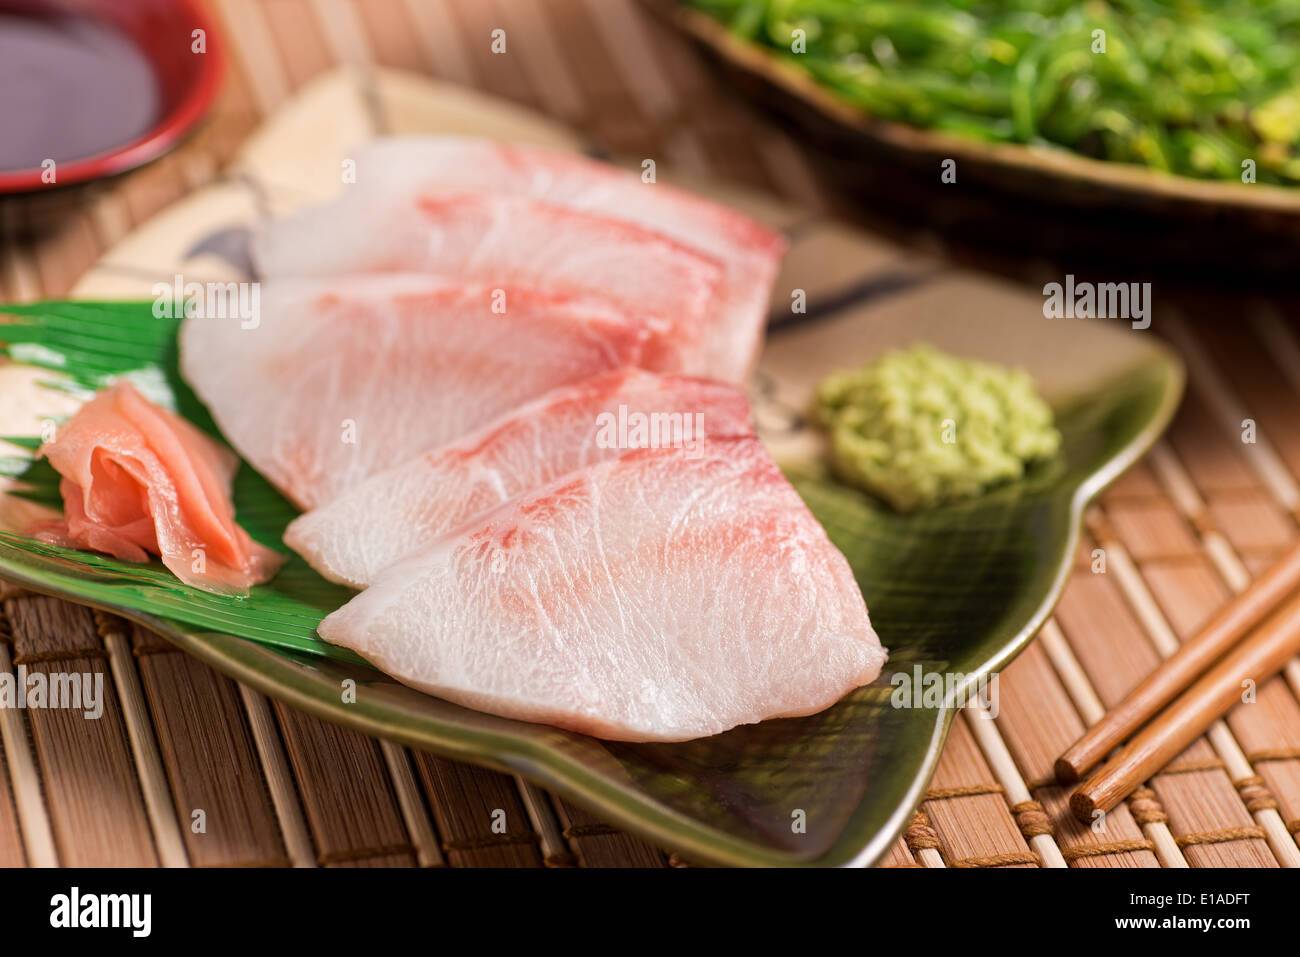 A delicious white fish sashimi served with wasabi paste, pickled ginger, japanese soy, and seaweed salad. Stock Photo